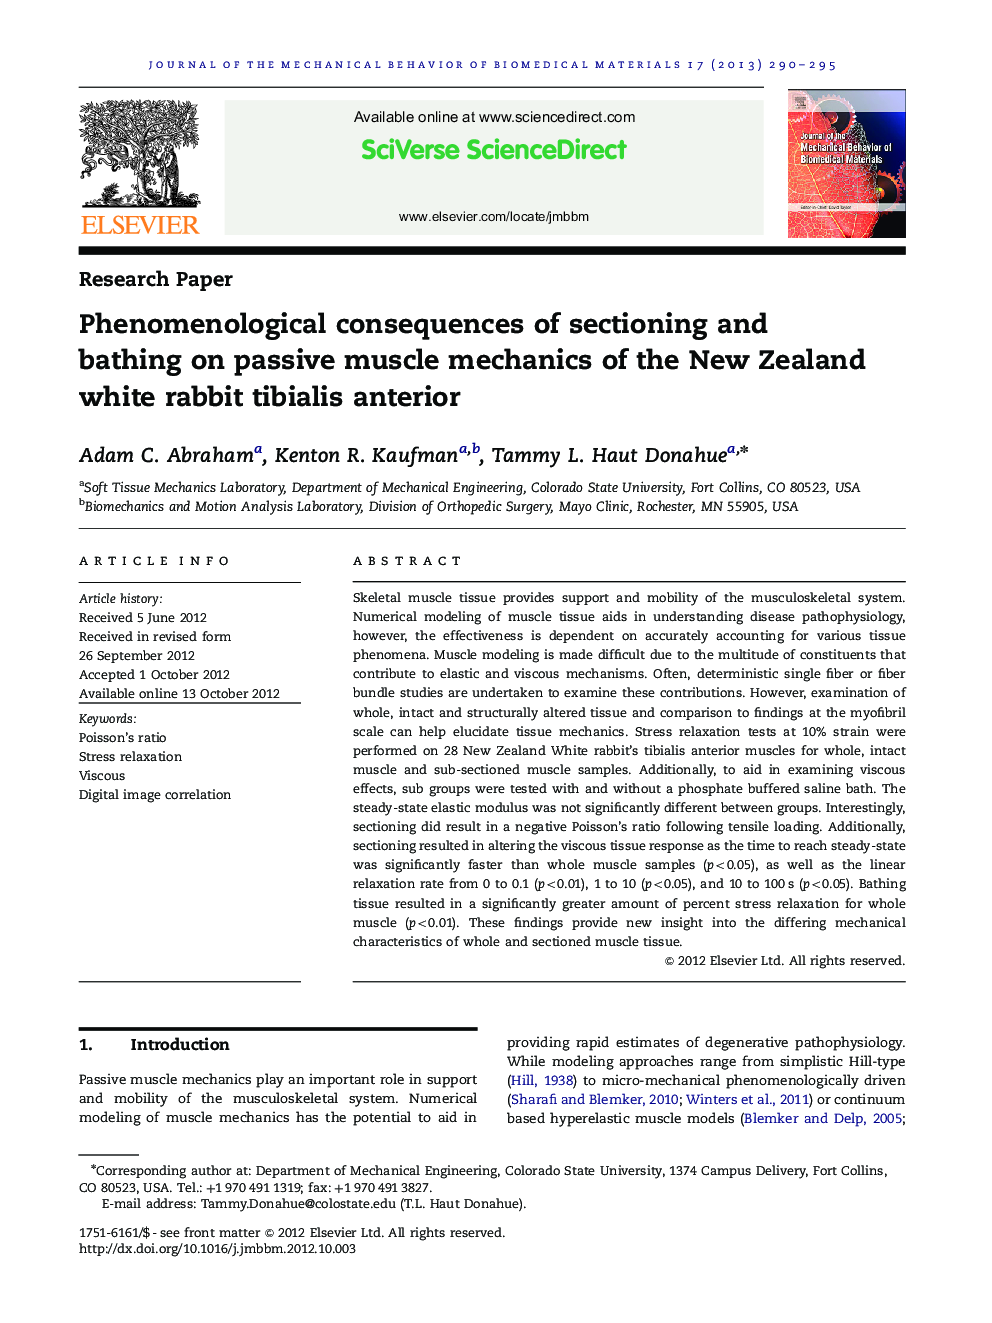 Phenomenological consequences of sectioning and bathing on passive muscle mechanics of the New Zealand white rabbit tibialis anterior